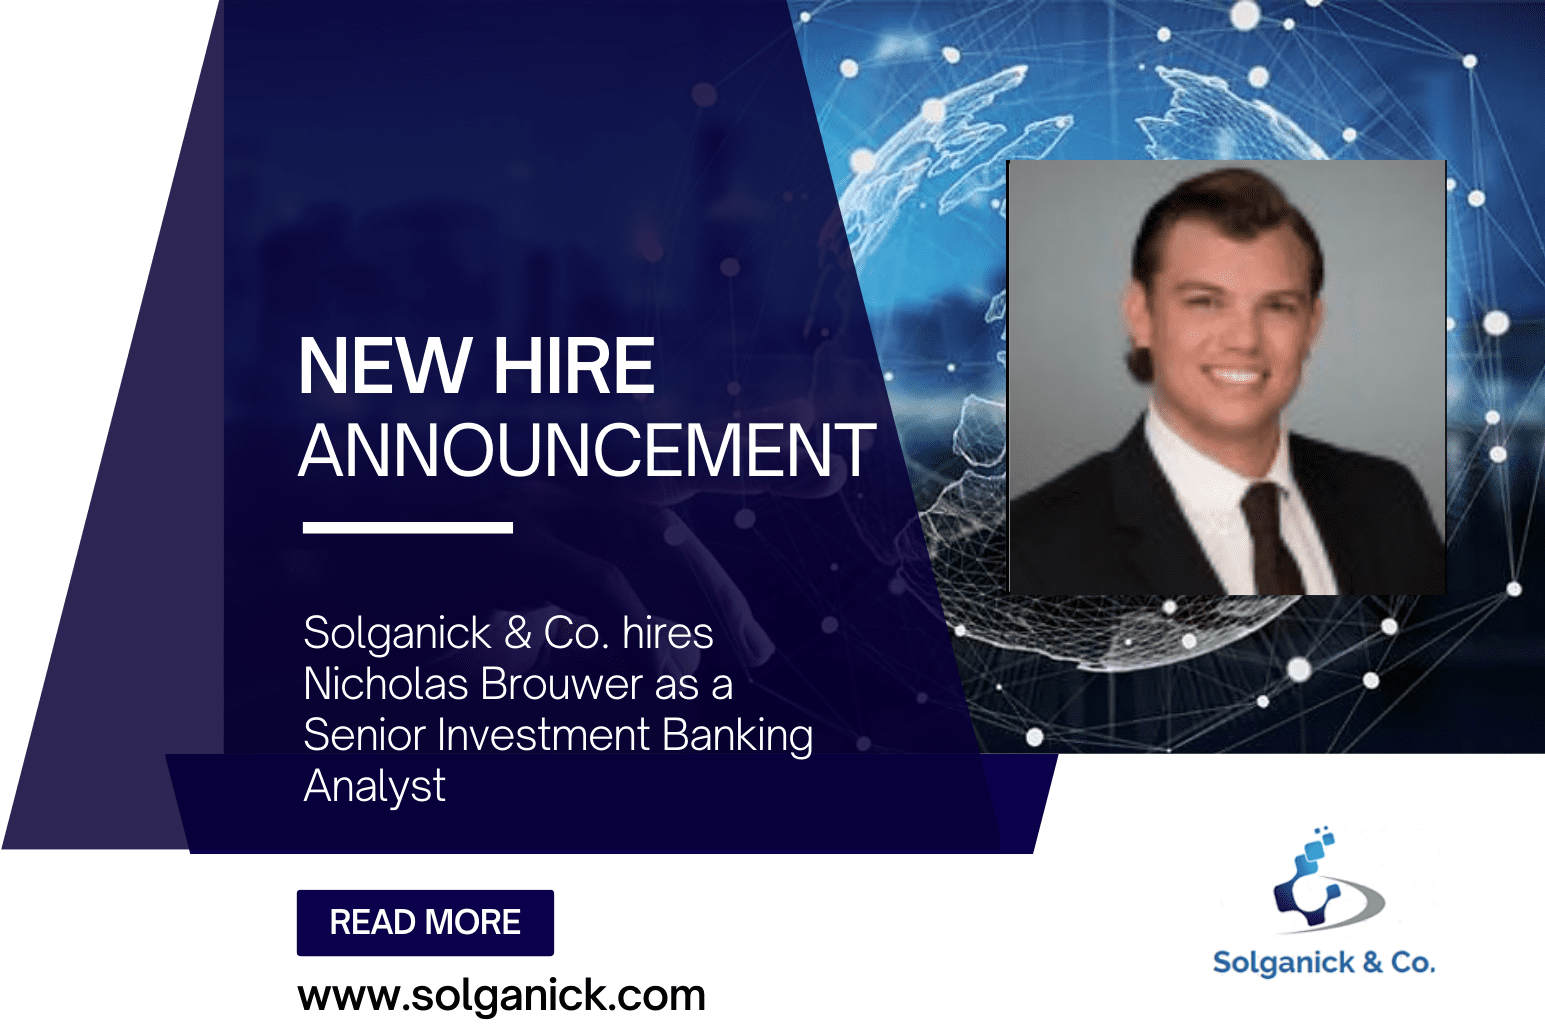 Nicholas Brouwer hired as a Senior Analyst with Solganick & Co.